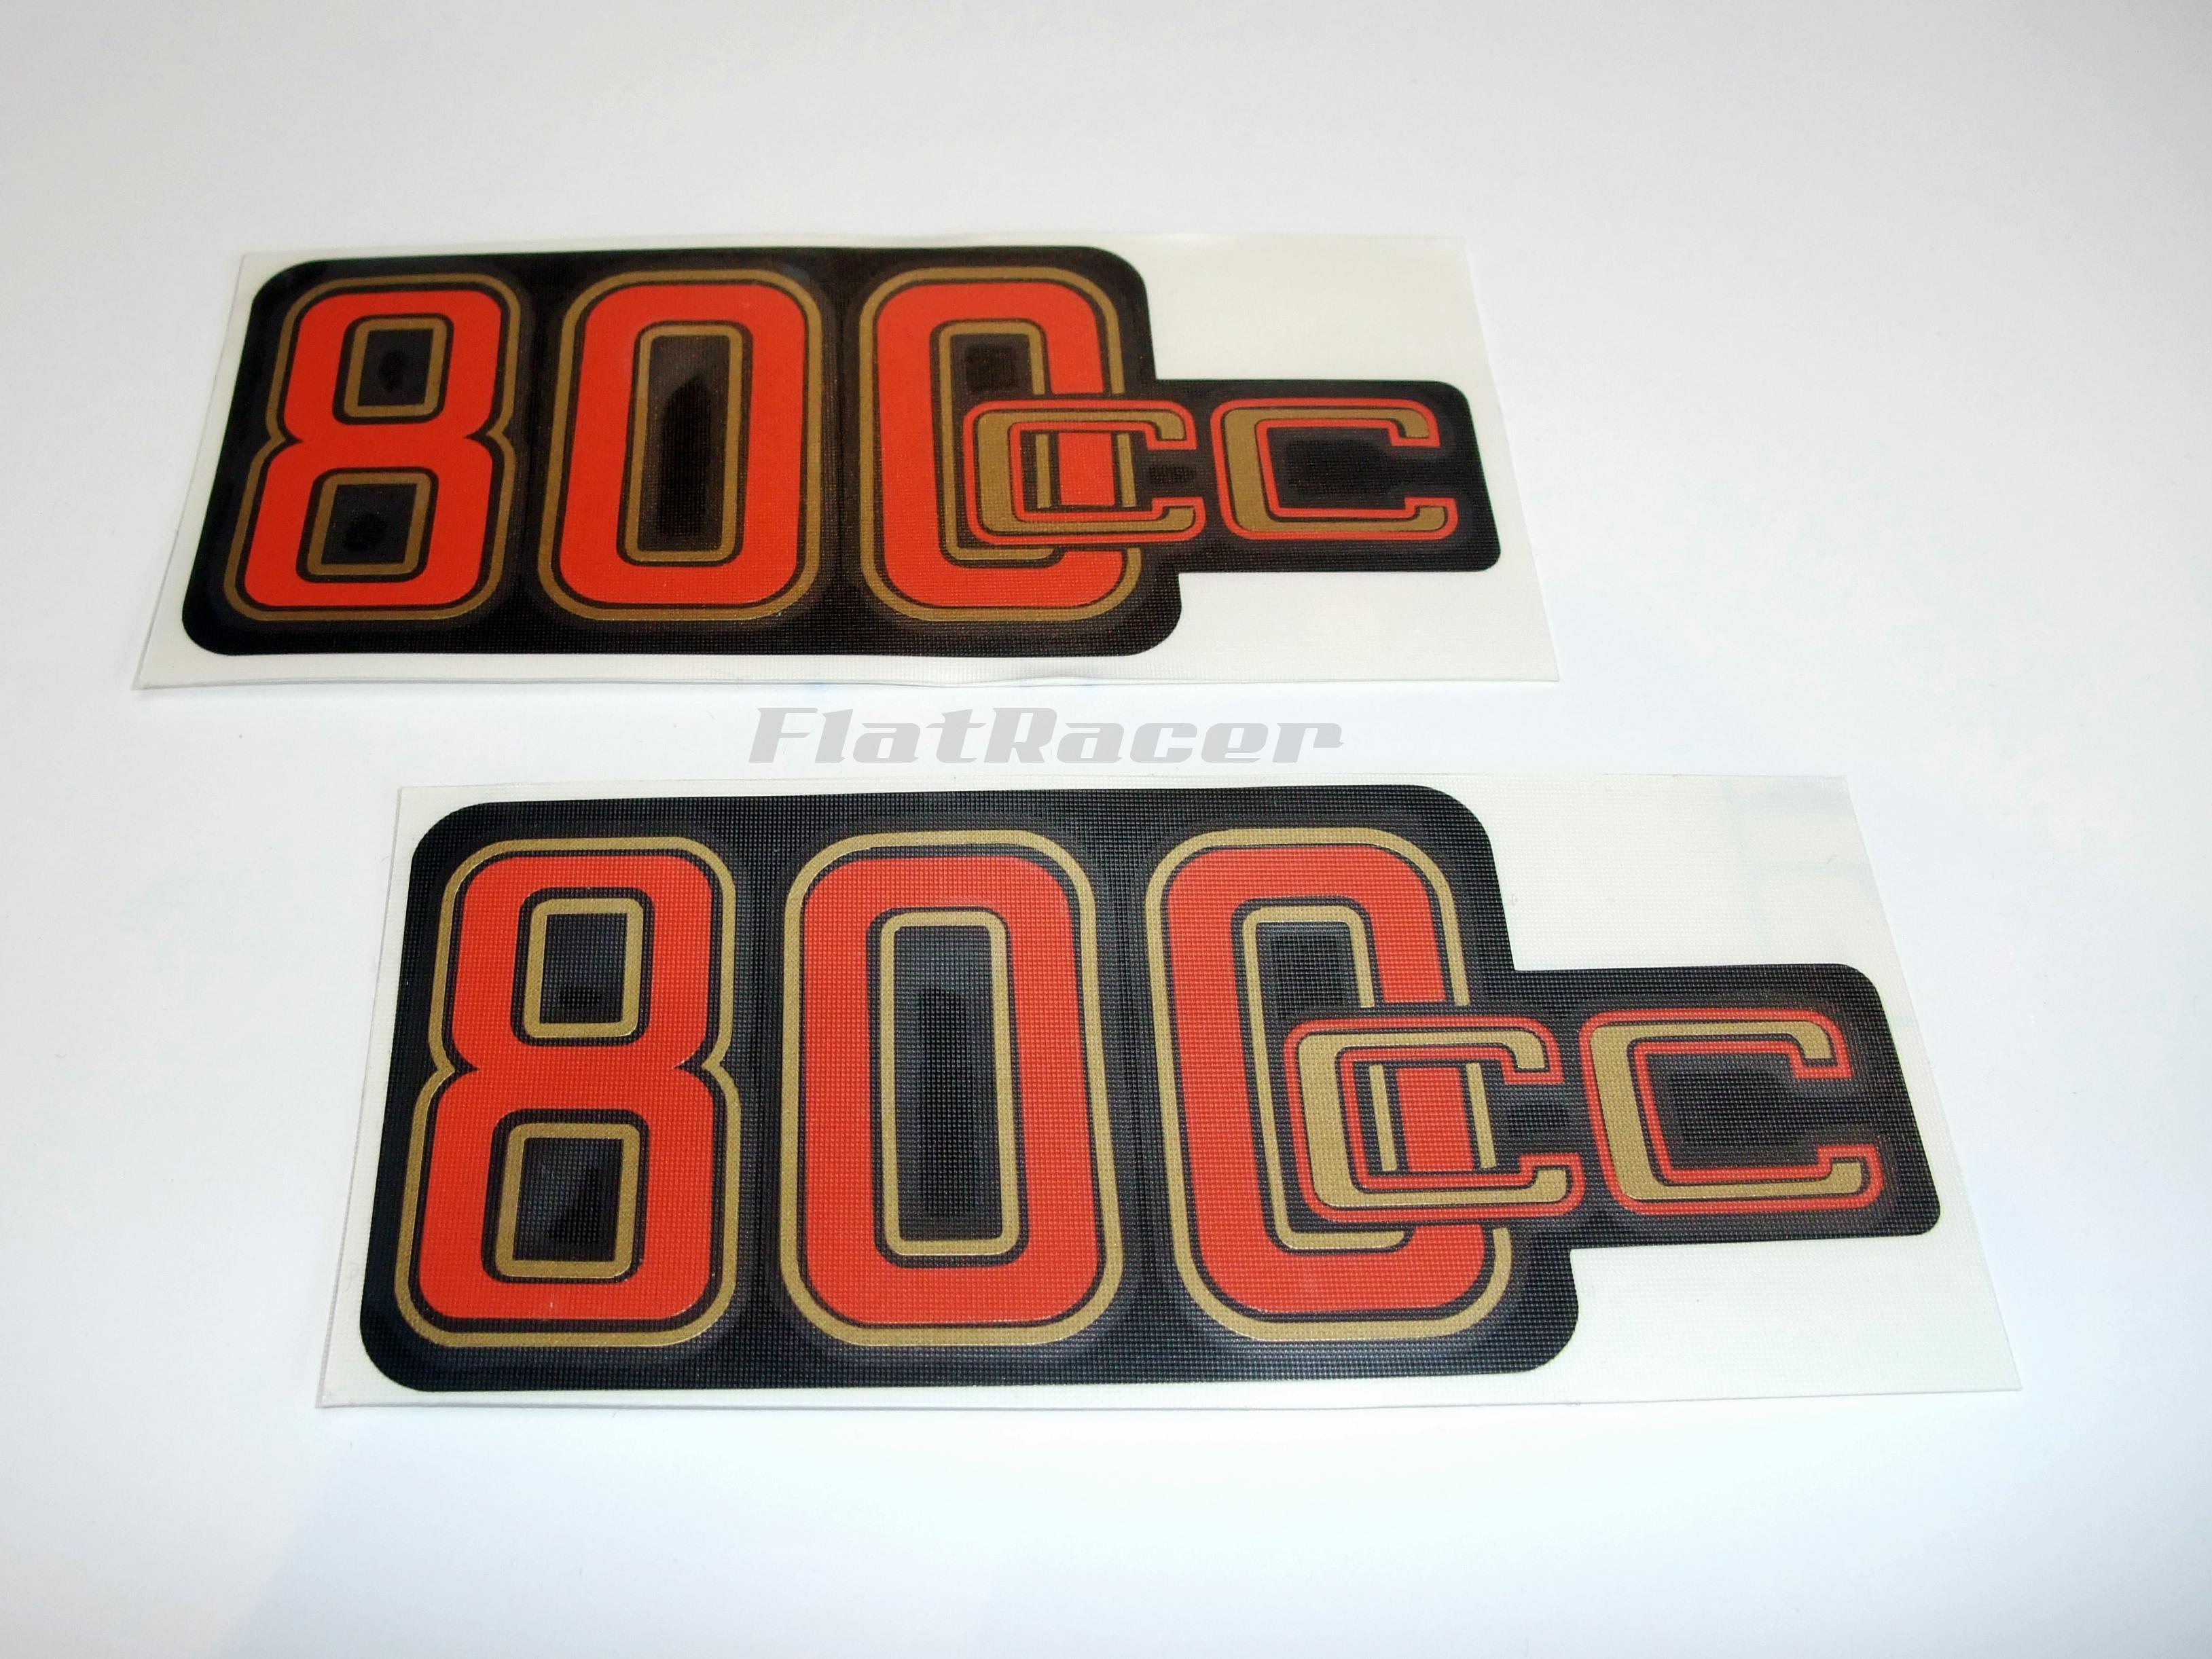 BMW R80 - 800cc battery side panel cover transfers (pair) - Red & Gold -  46631237265